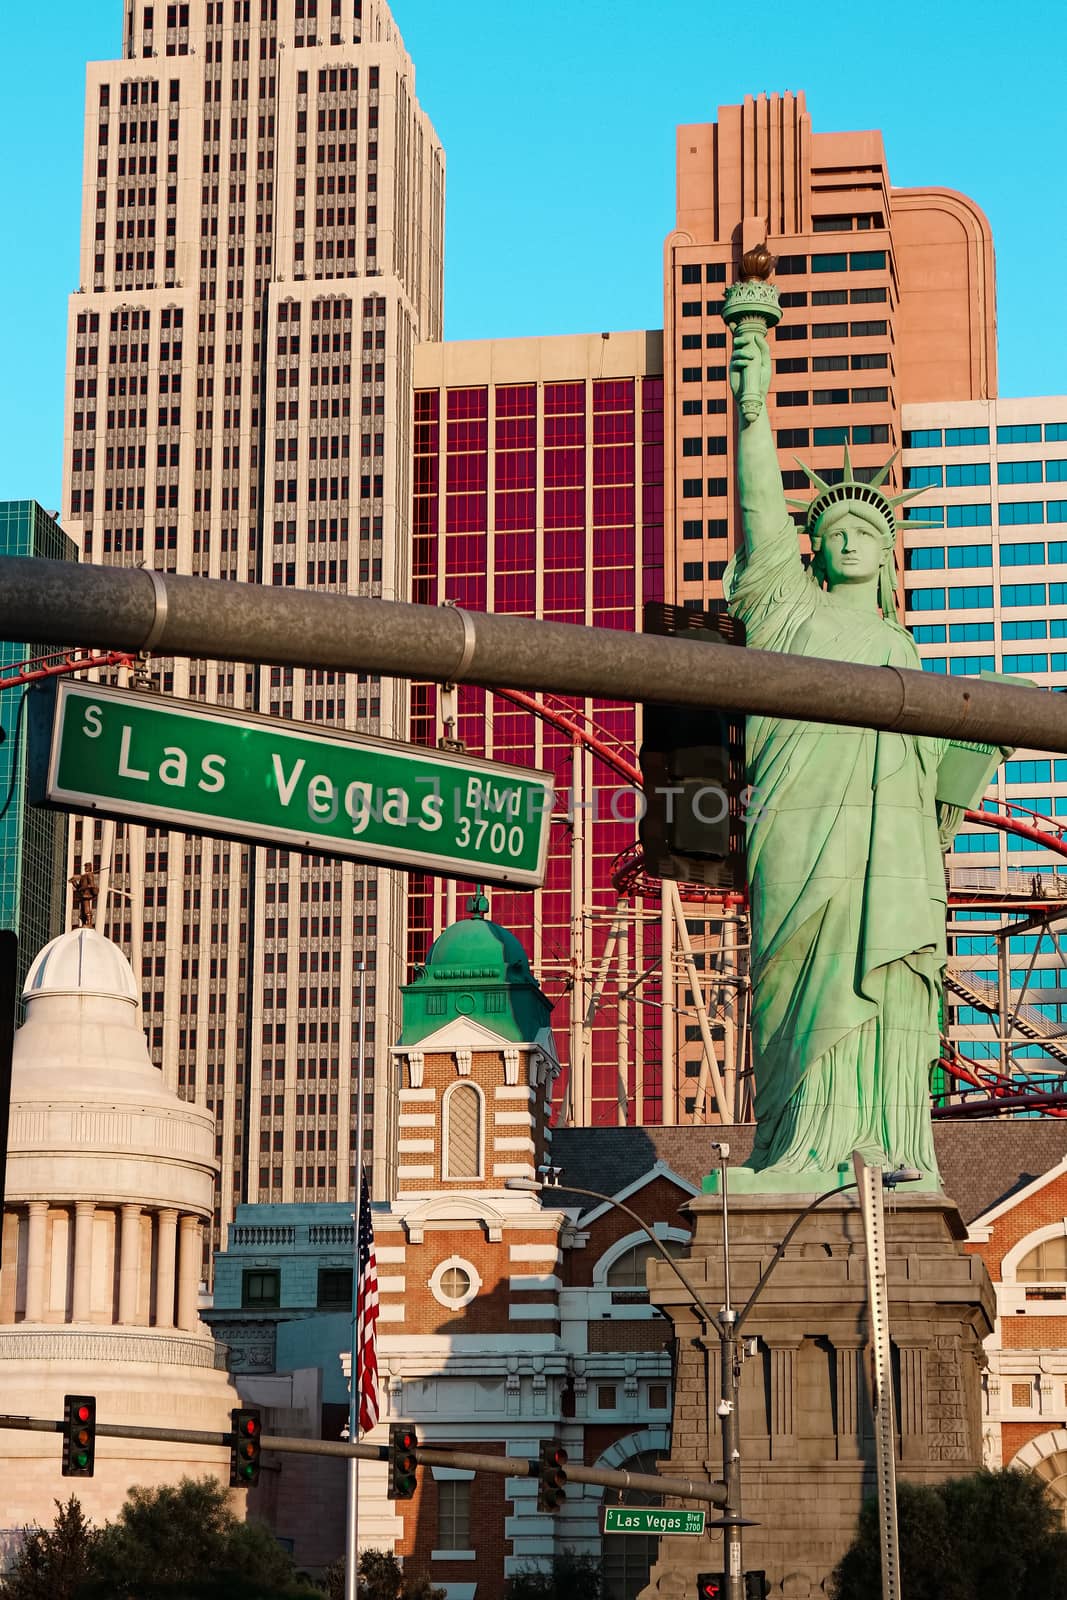 Road sign of Las Vegas BLVD.Street sign of Las vegas Boulevard.Green Las Vegas Sign with Hotel in Background. by USA-TARO